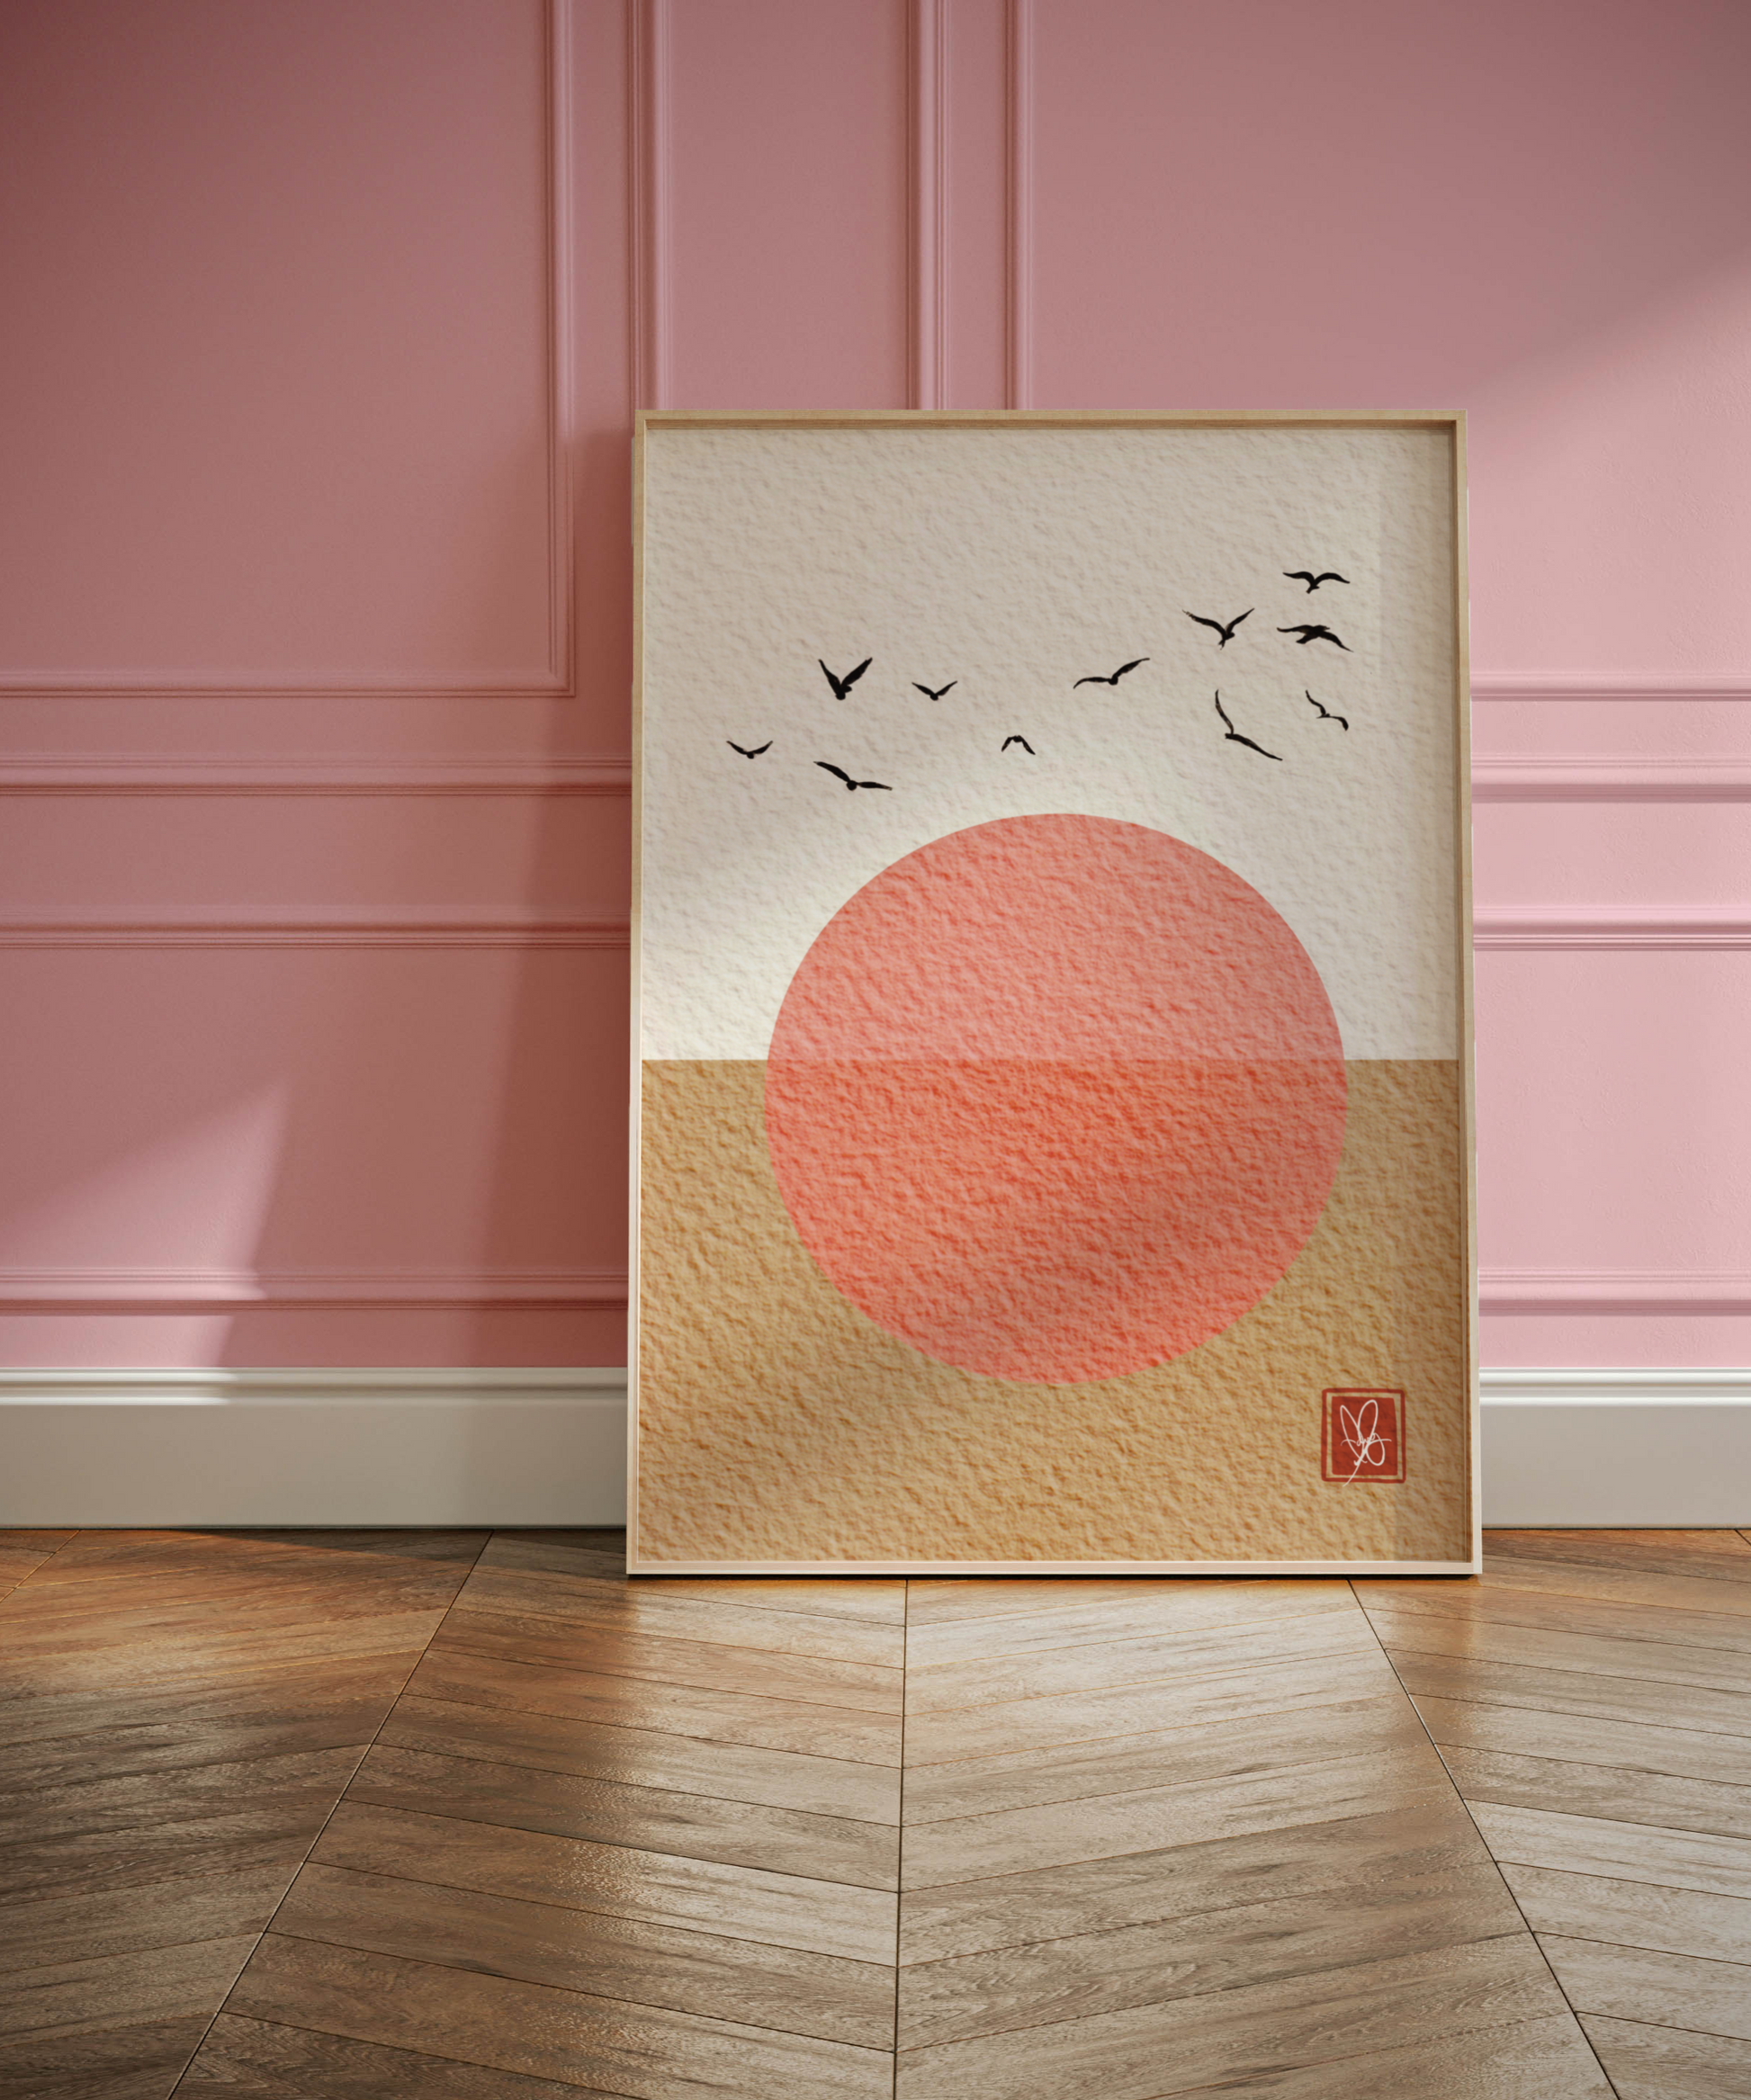 Japandi-Inspired Calligraphy Print featuring Hand-Drawn Birds in Oriental Style by Unwrapped Collections. Perfect for adding tranquility to your home decor. Available in various sizes. Shop now!